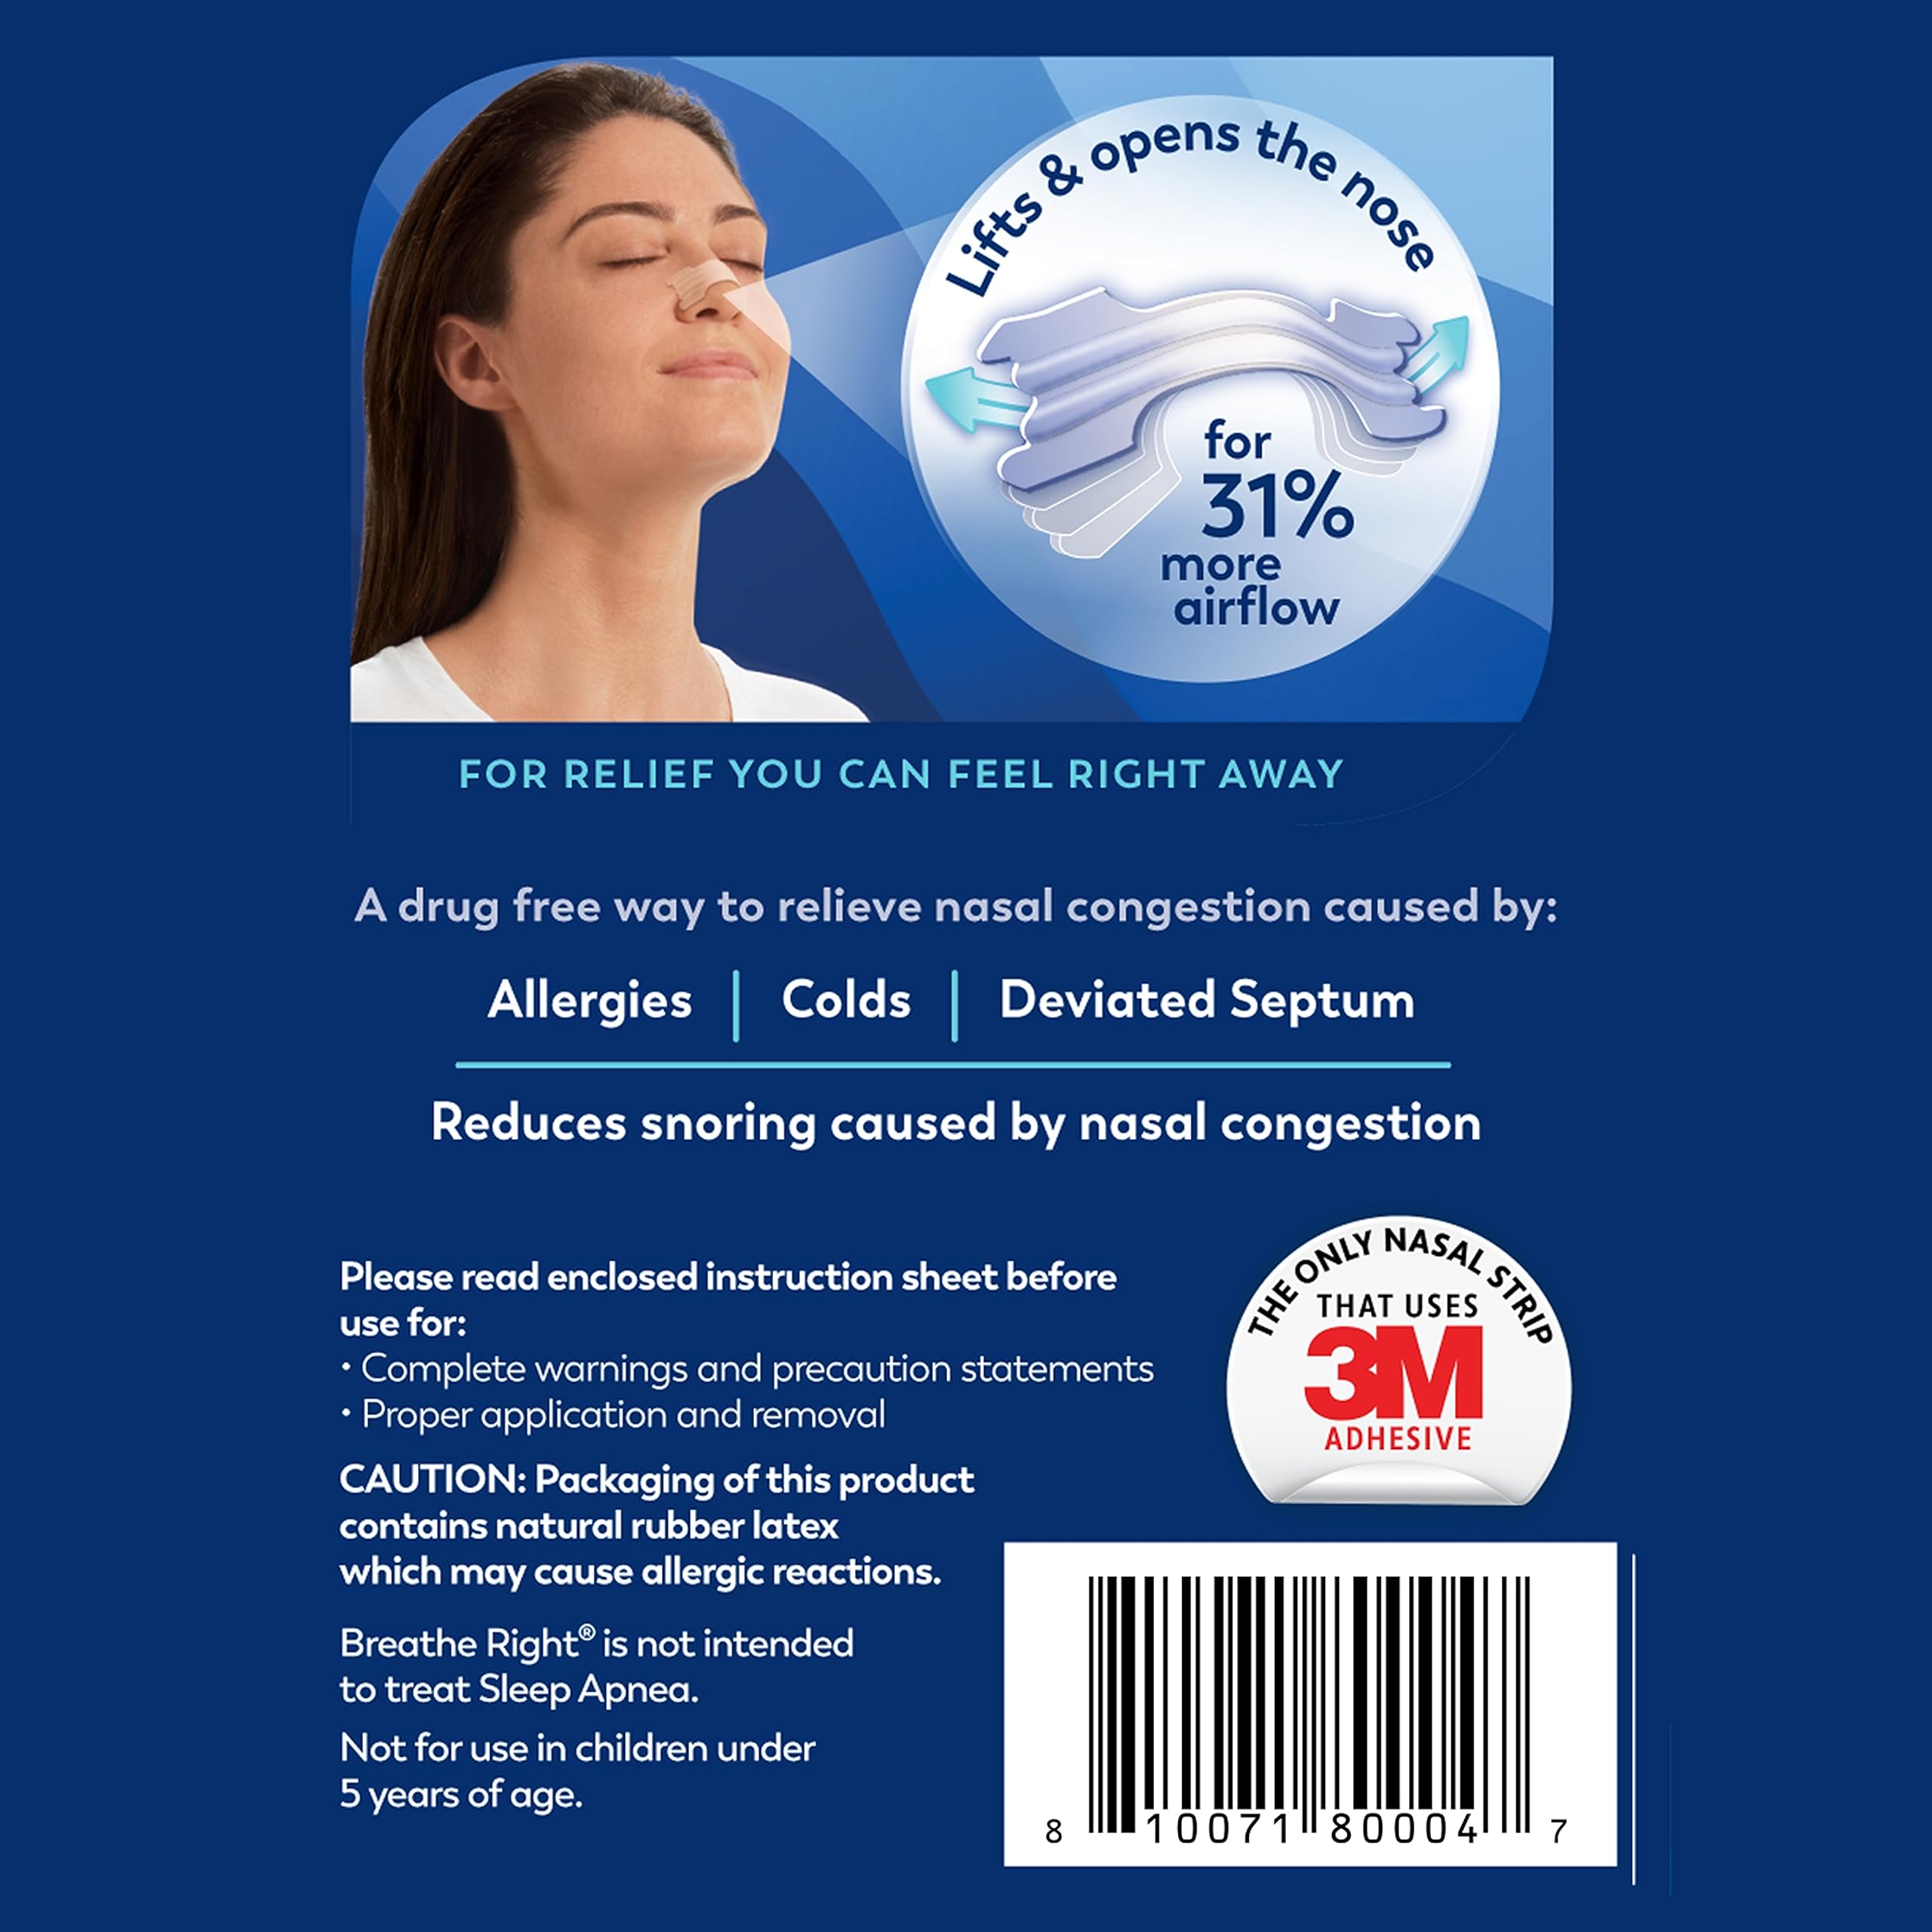 Breathe Right Original Nasal Strips | Clear Nasal Strips | Sm/Med | for Sensitive Skin | Help Stop Snoring | Drug-Free Snoring Solution & Nasal Congestion Relief Caused by Colds & Allergies | 30 ct